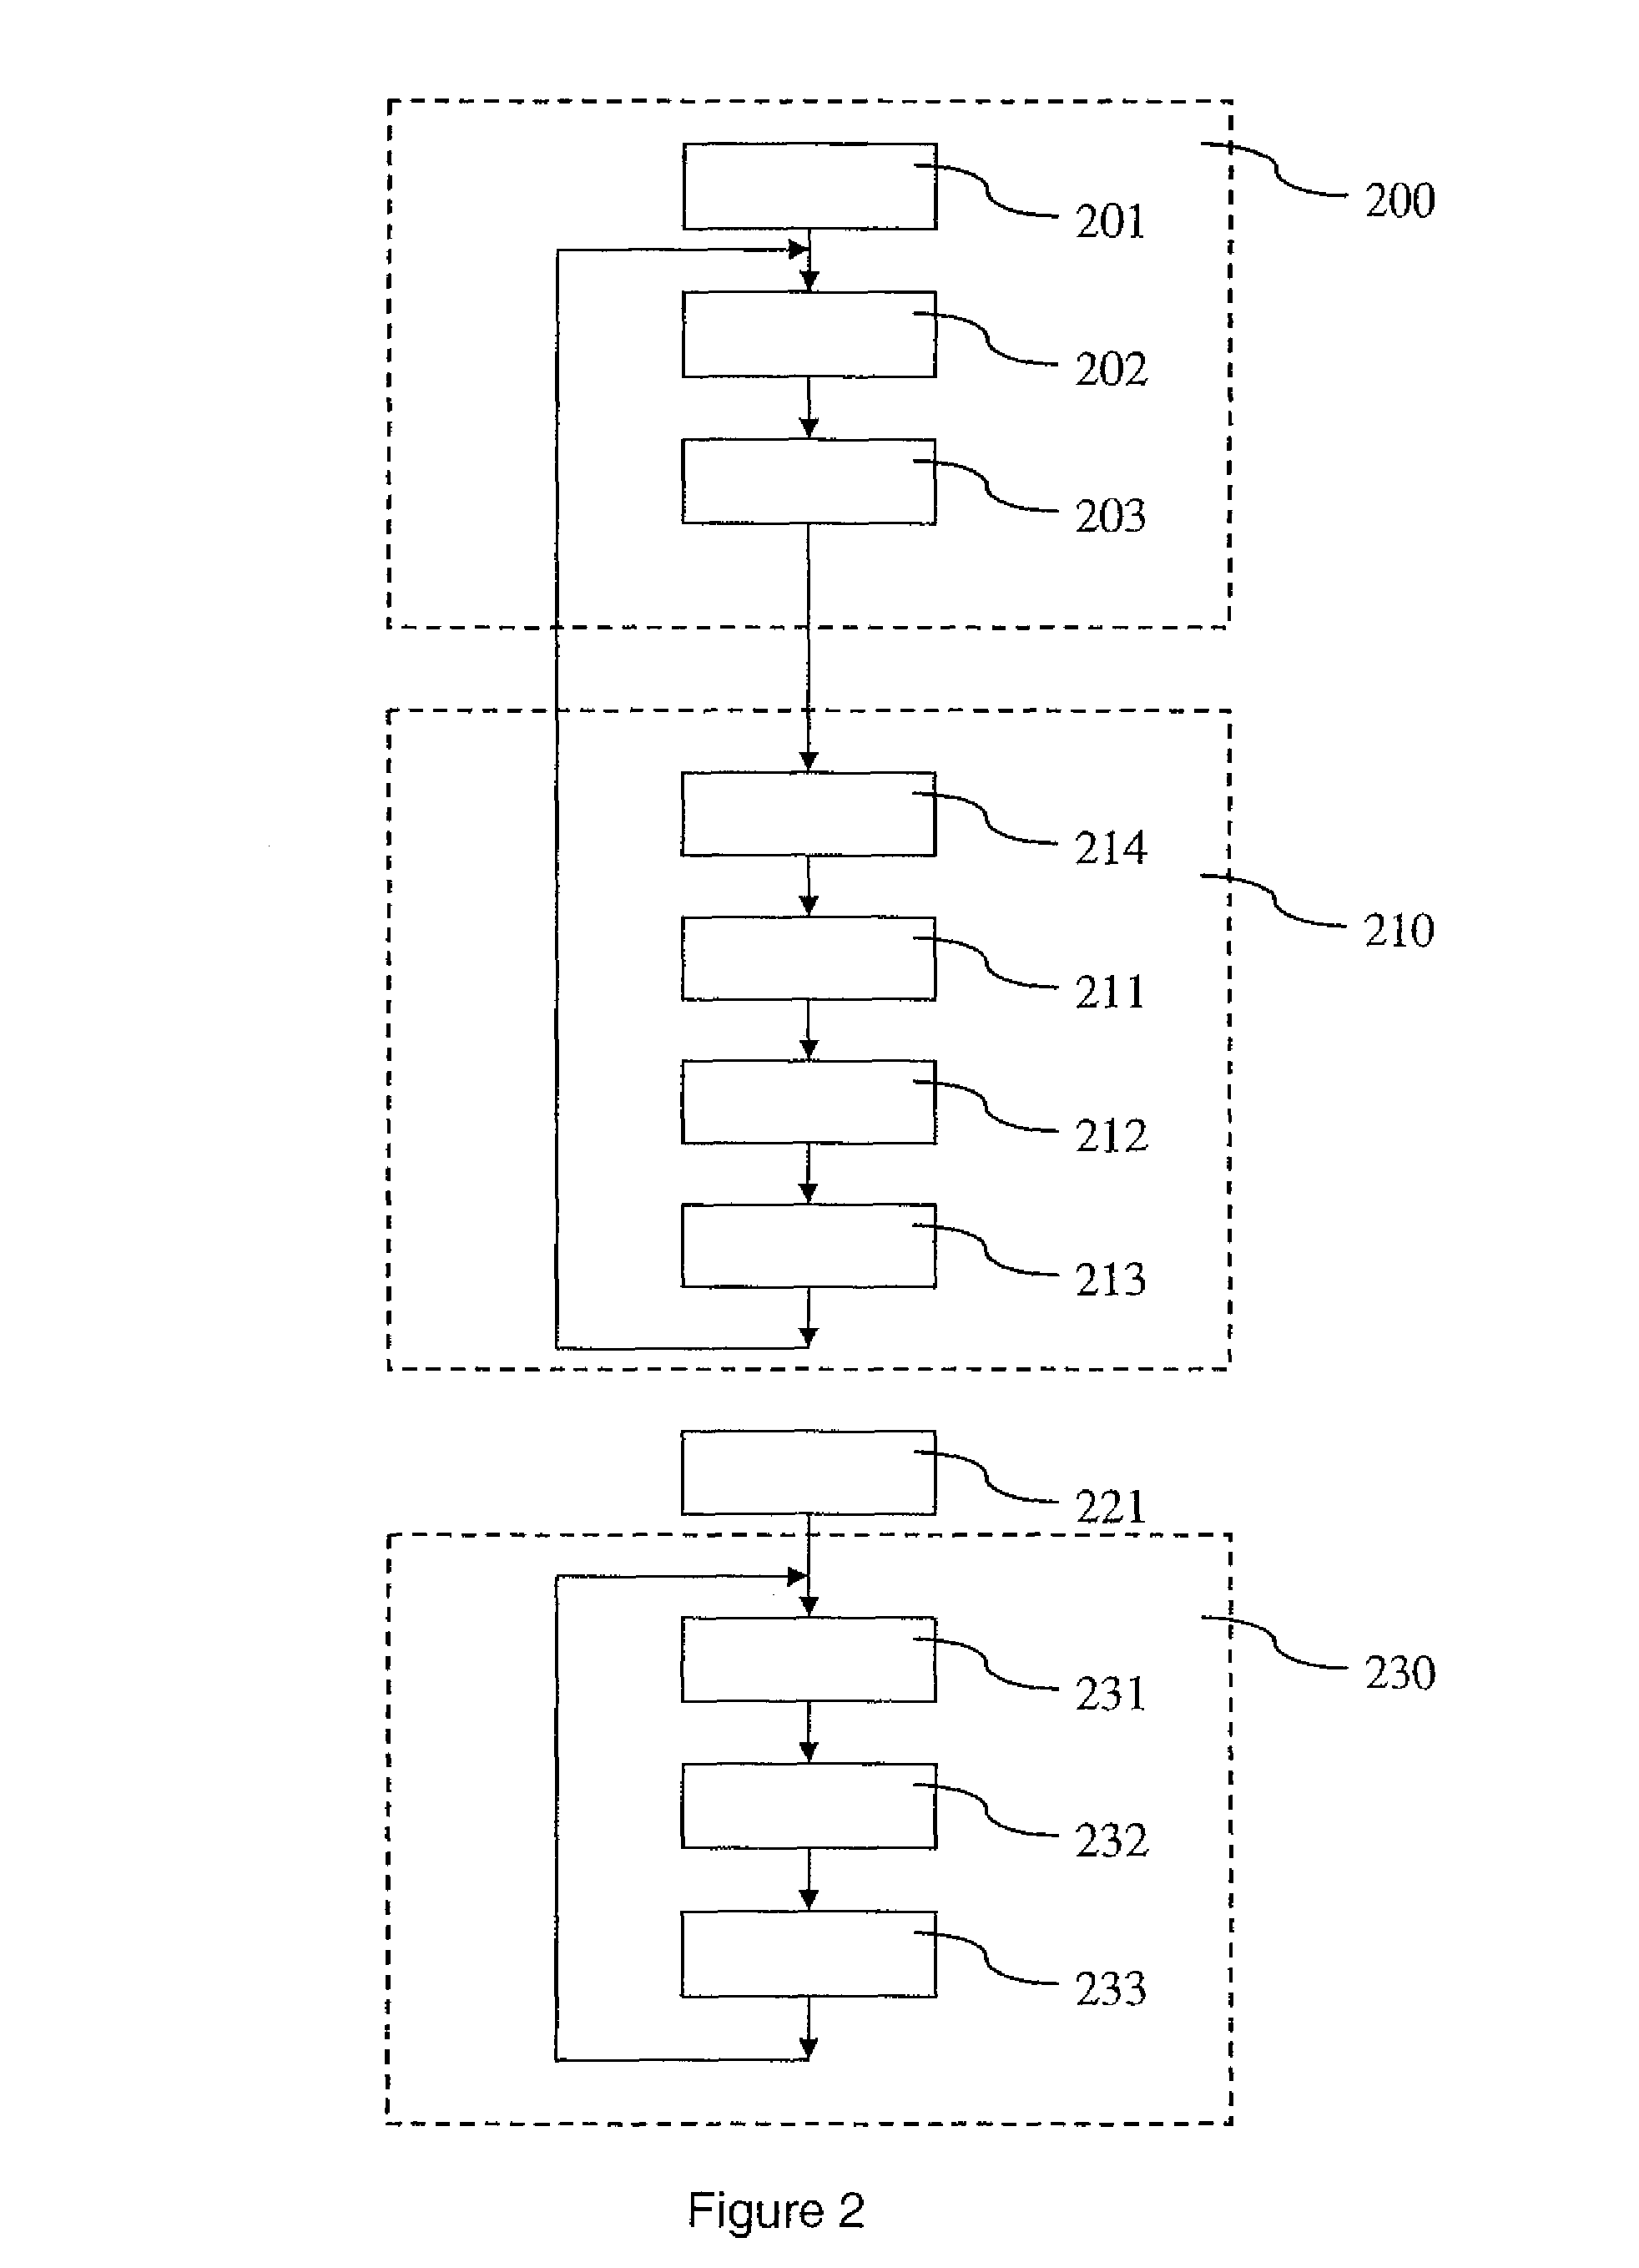 Method and device for optimizing the compression of a video stream